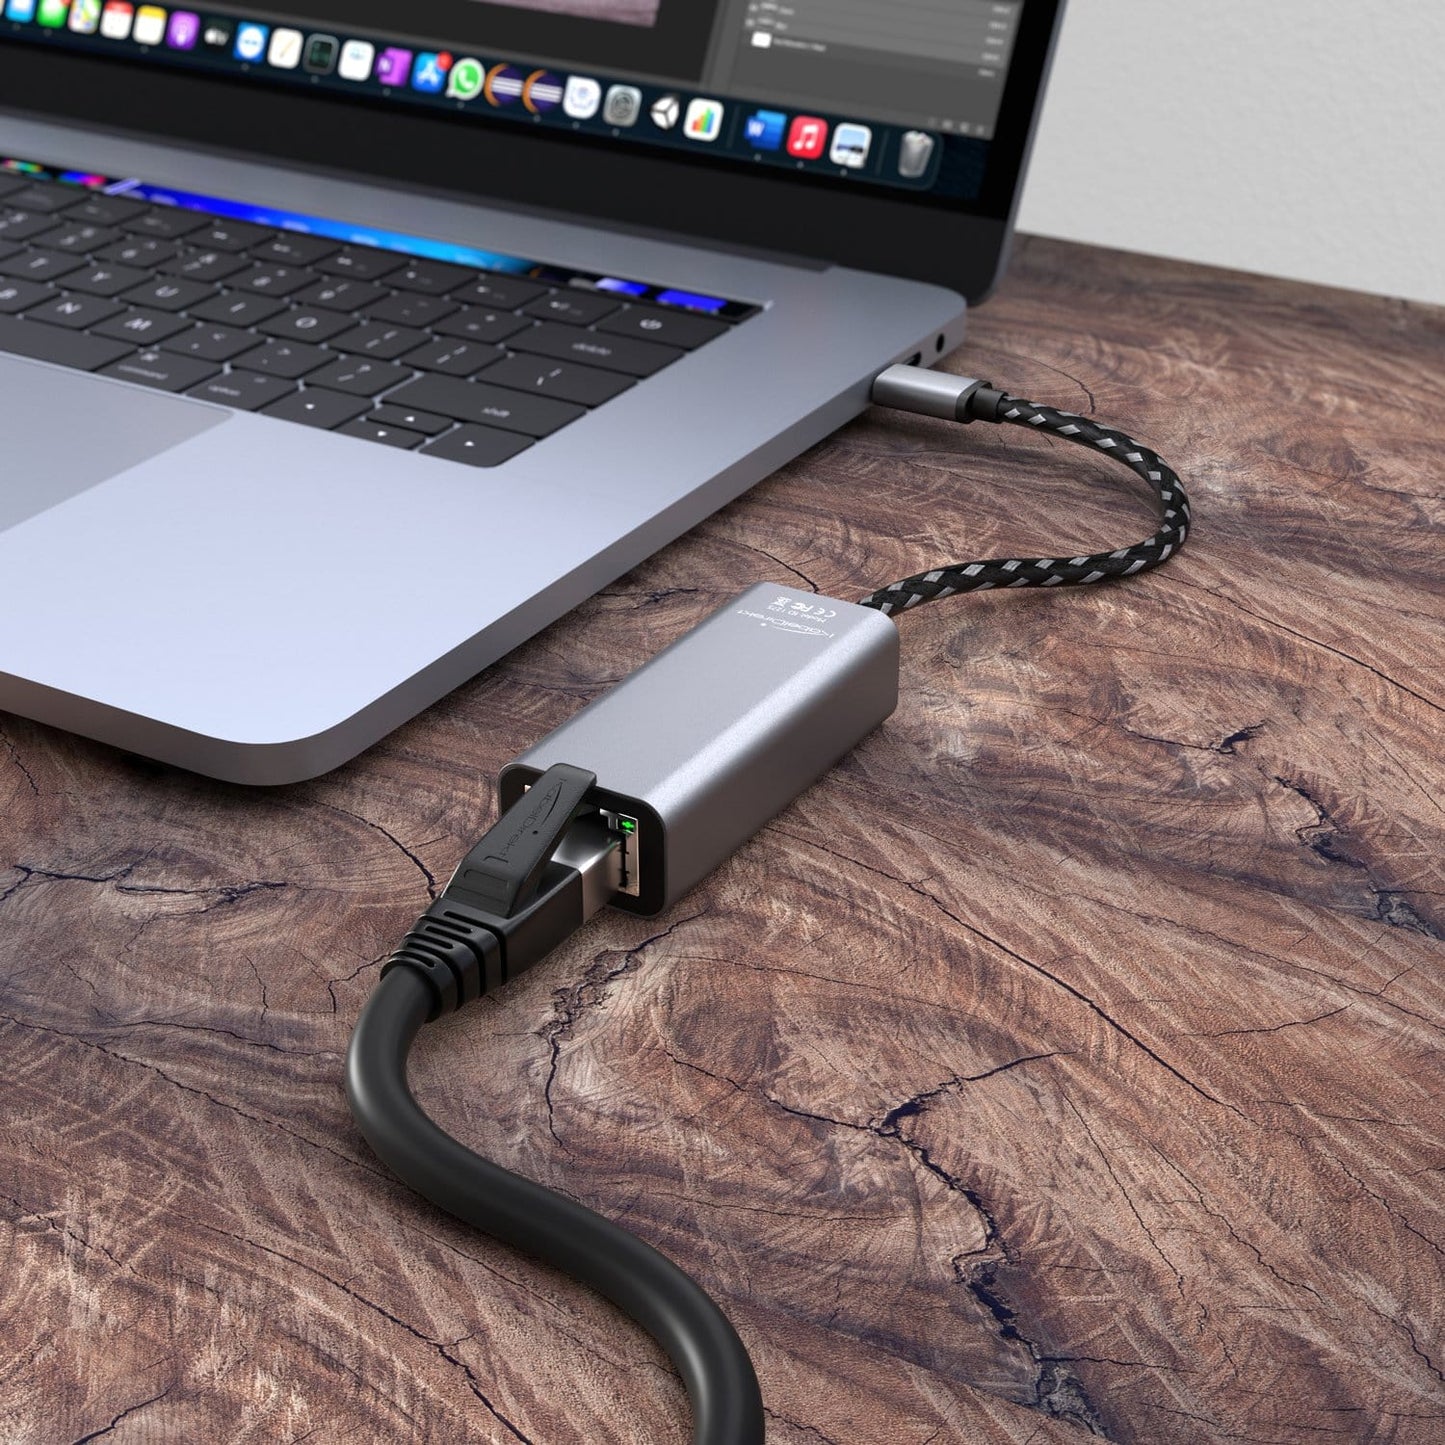 USB-C ethernet adapter – Connect your RJ45 cable to your tablet, notebook or smartphone